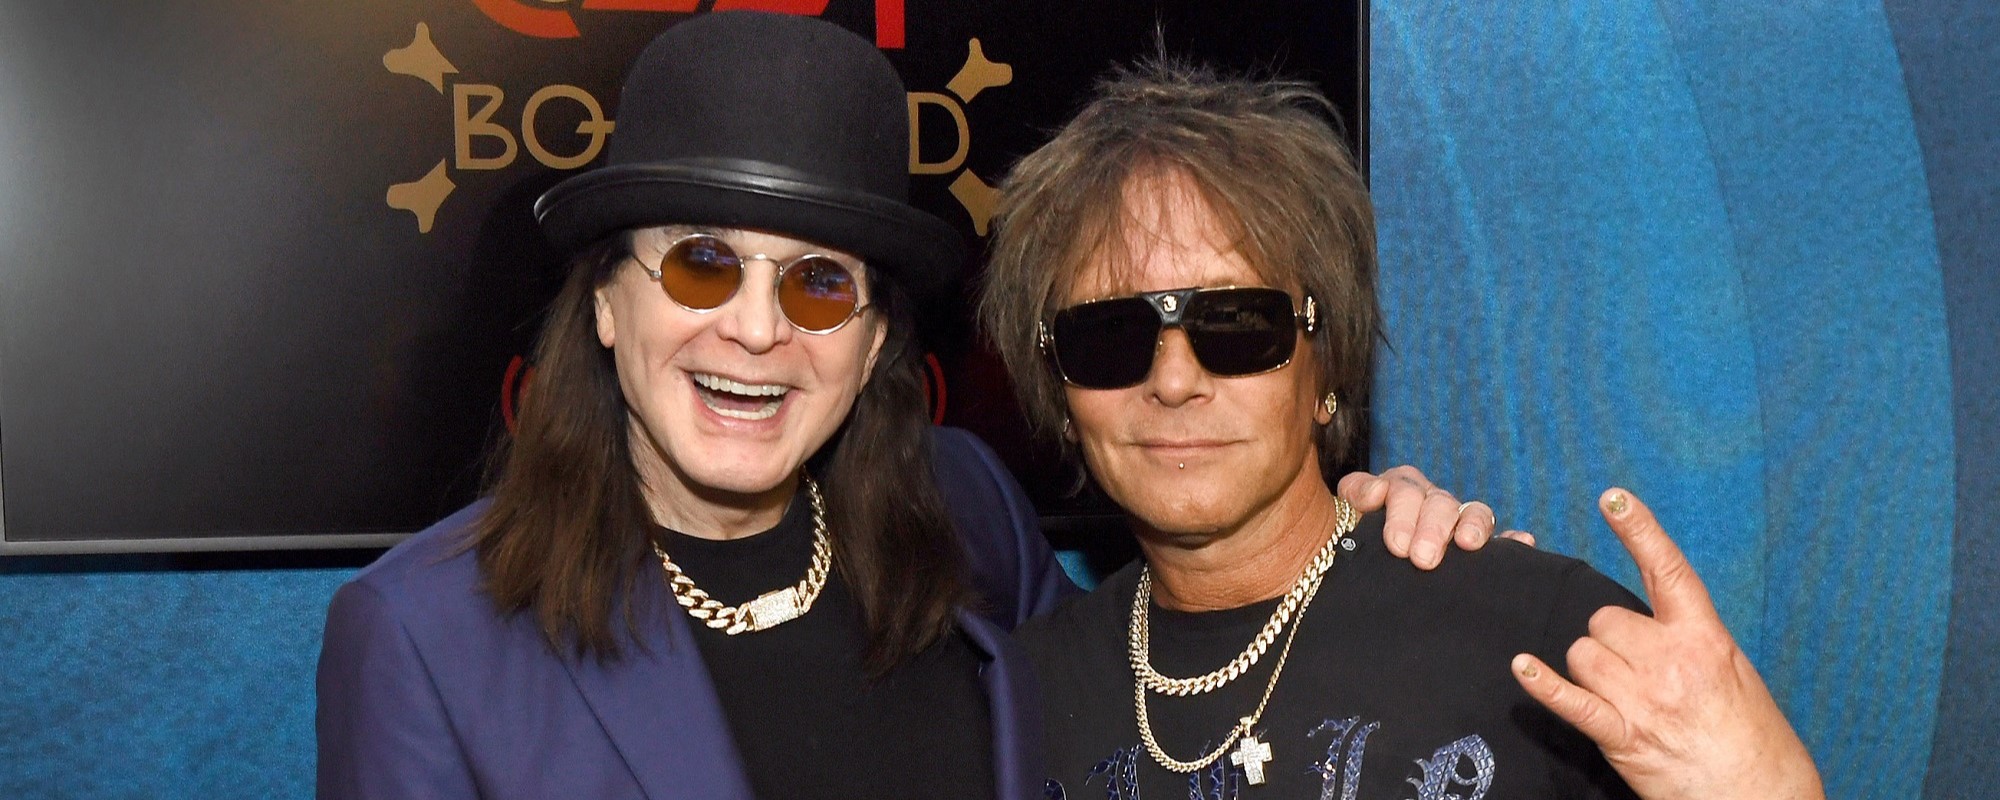 Ozzy Osbourne Launching New Talk Show With Billy Morrison About Aliens, Rock ‘n’ Roll, & More